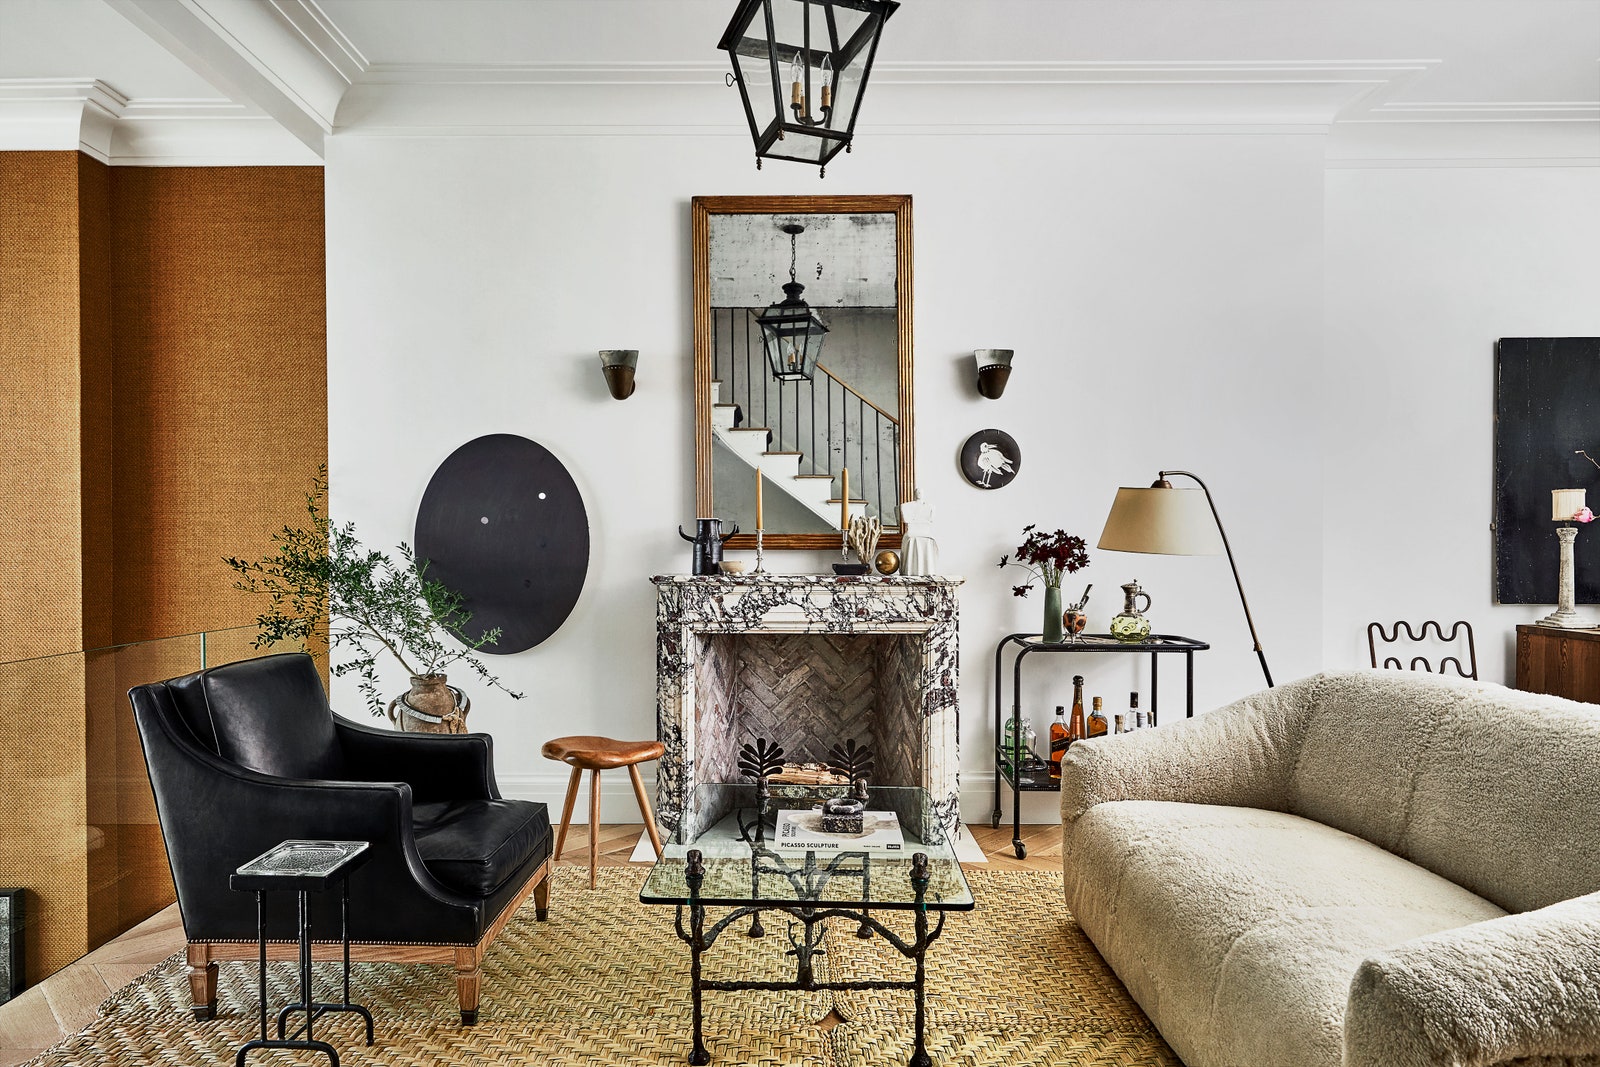 Décor Inspiration | At With Home: Nate Berkus and Jeremiah Brent, NYC